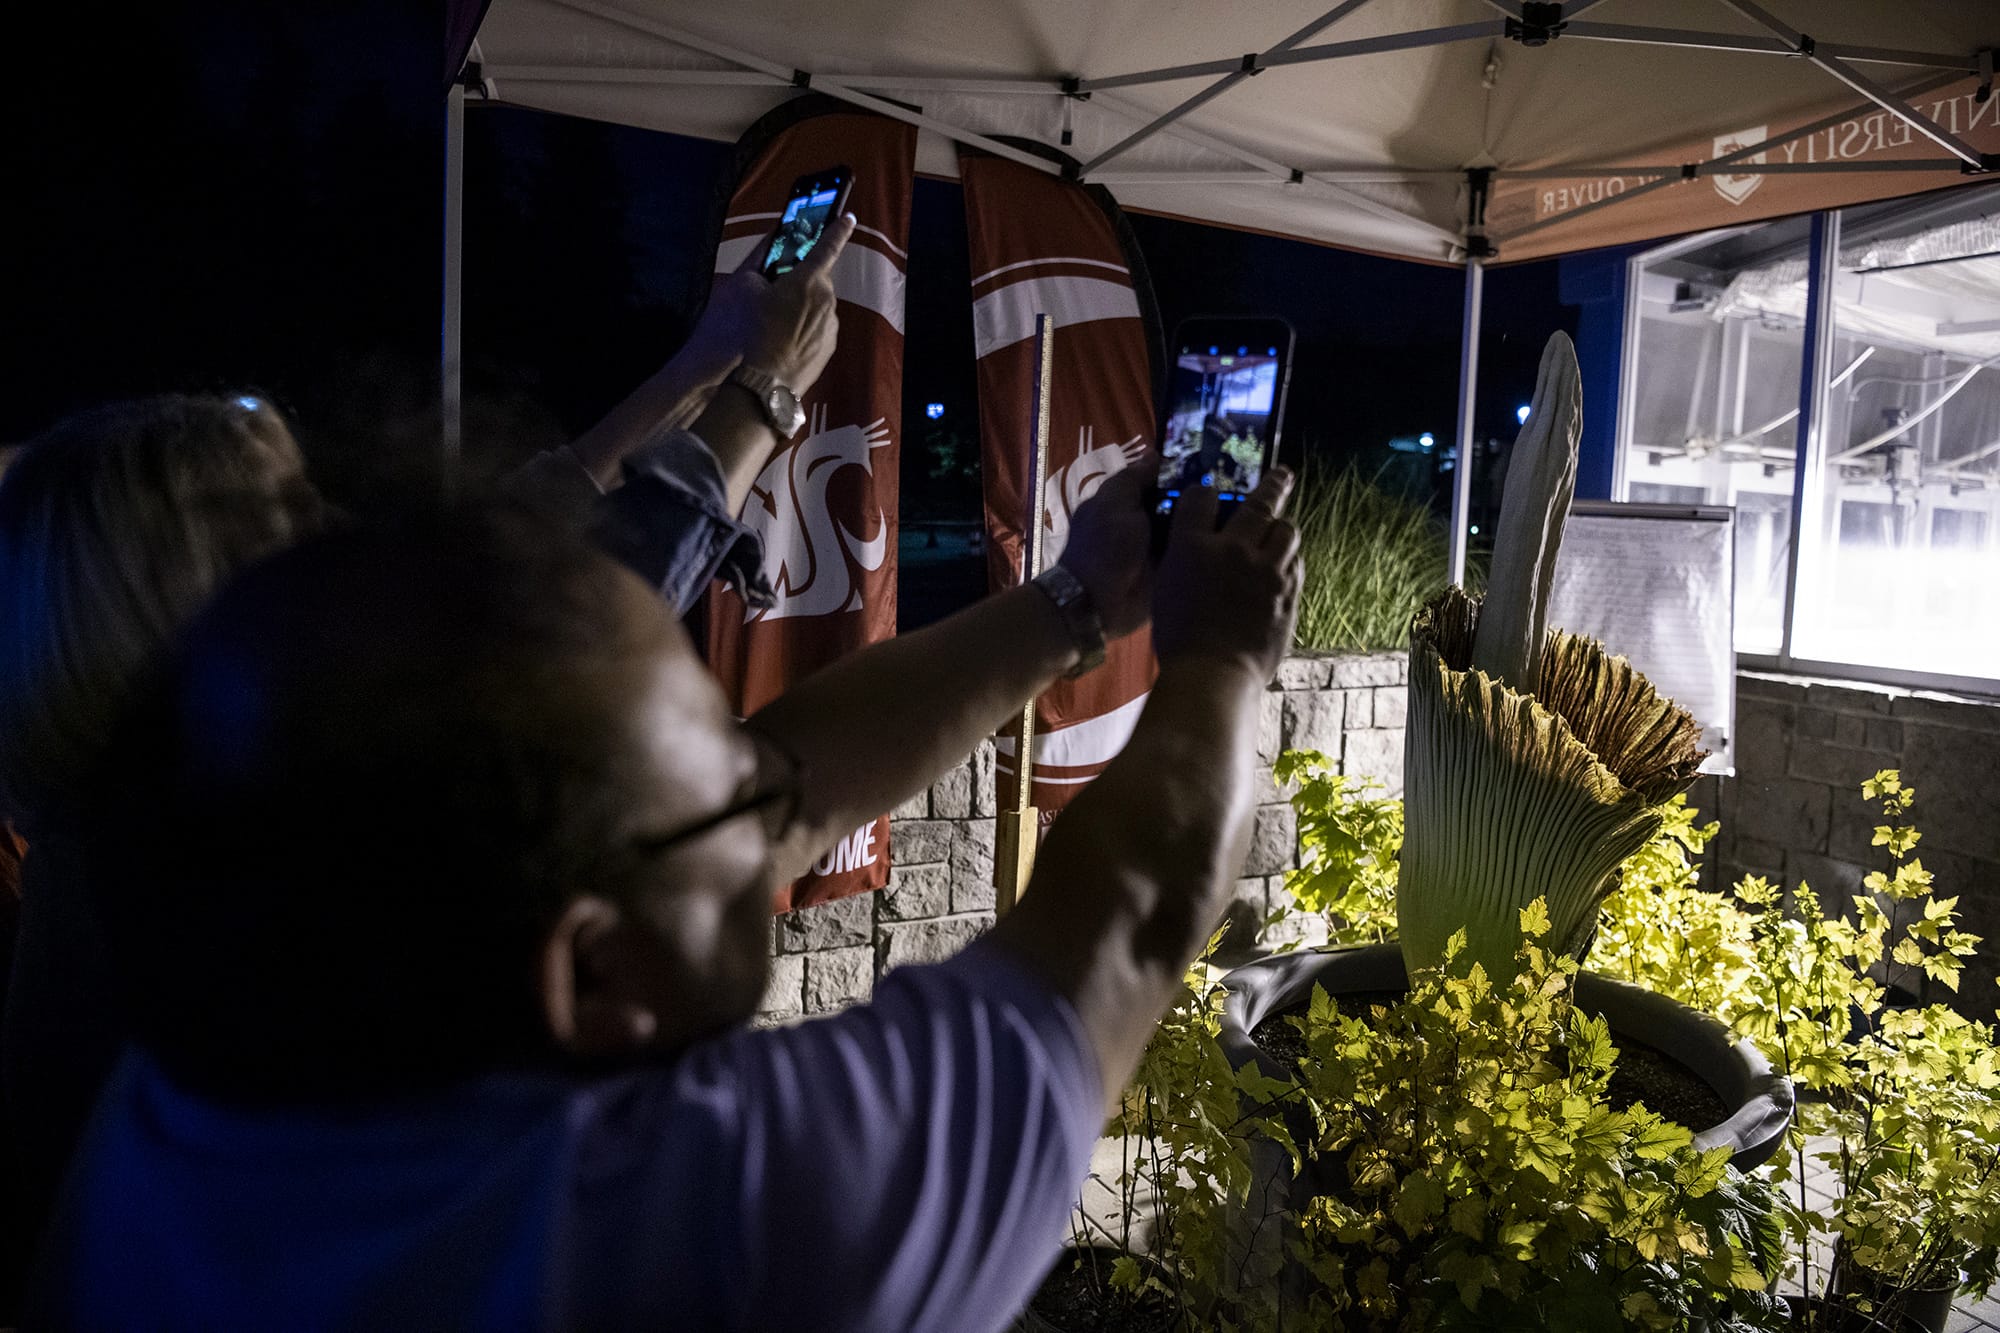 Kathy Lee and Wai Lee, both of Portland, take photos of the Titan VanCoug, the rare corpse flower, as it begins to bloom around 9:30 p.m. Monday at Washington State University Vancouver.